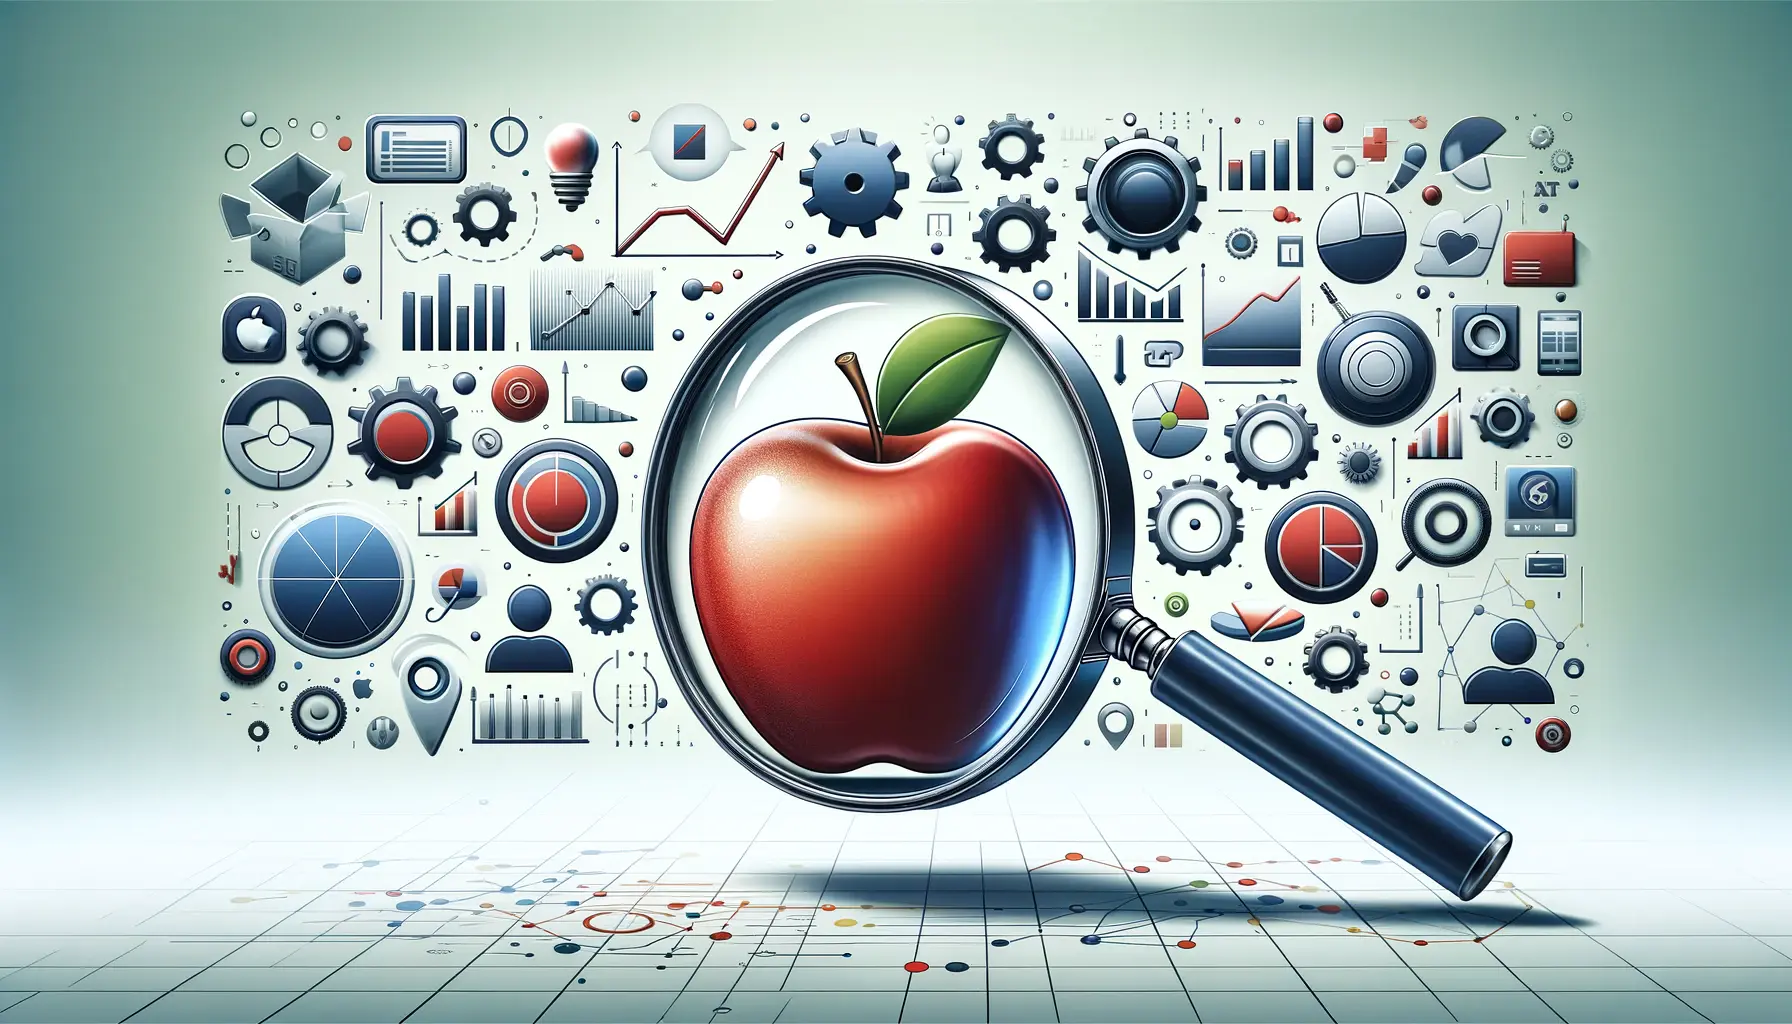 Strategic Keyword Research for Apple Ads